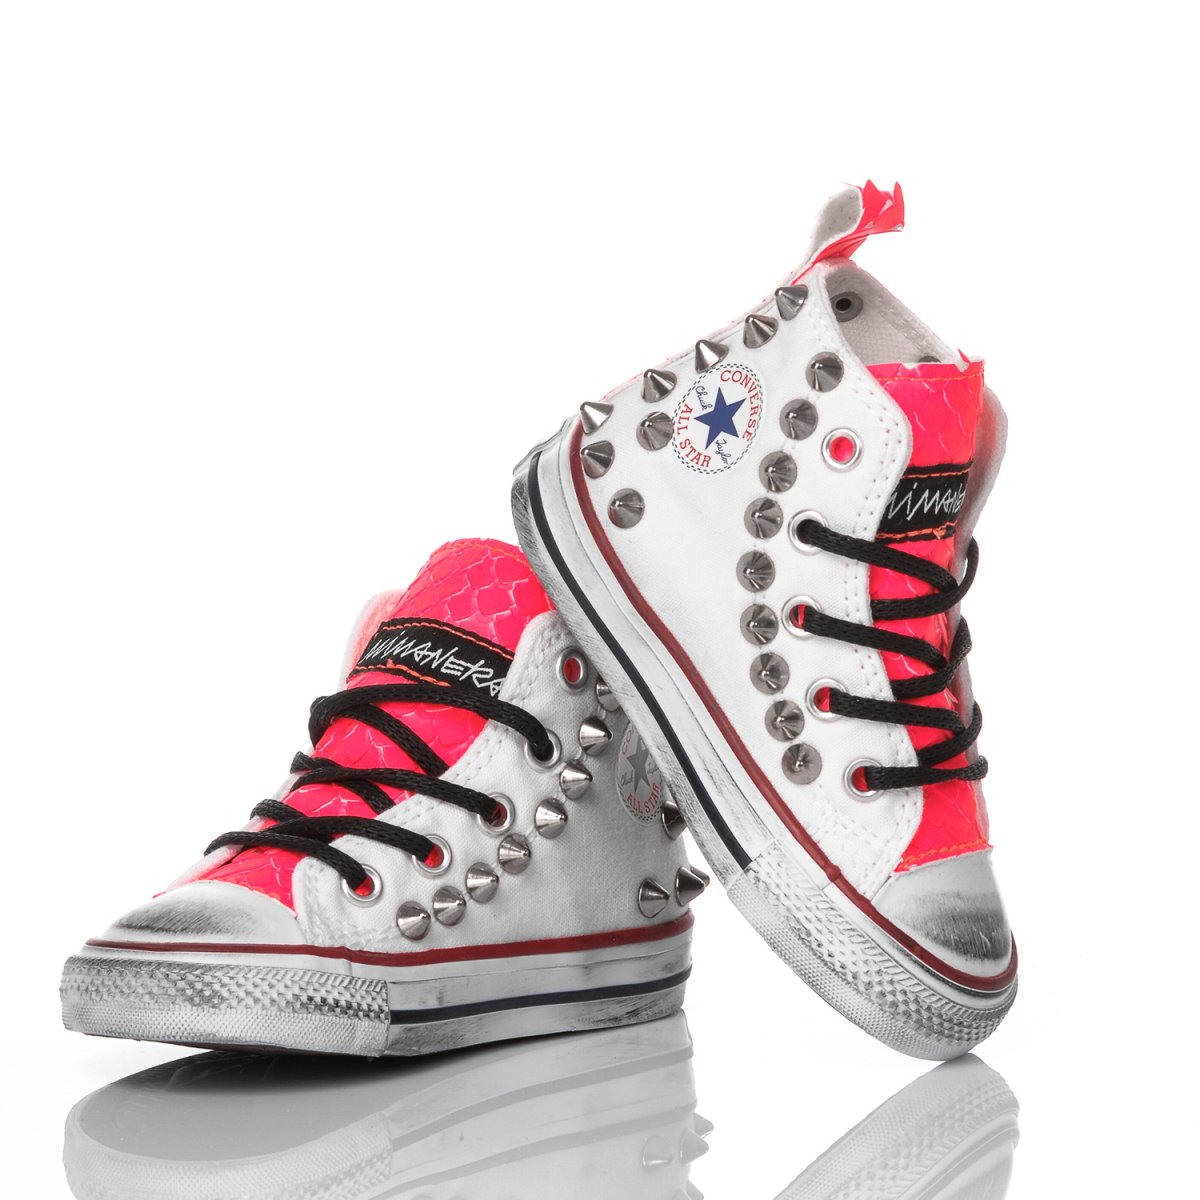 Converse Baby Fuxia Spike Chuck Taylor Hi Special